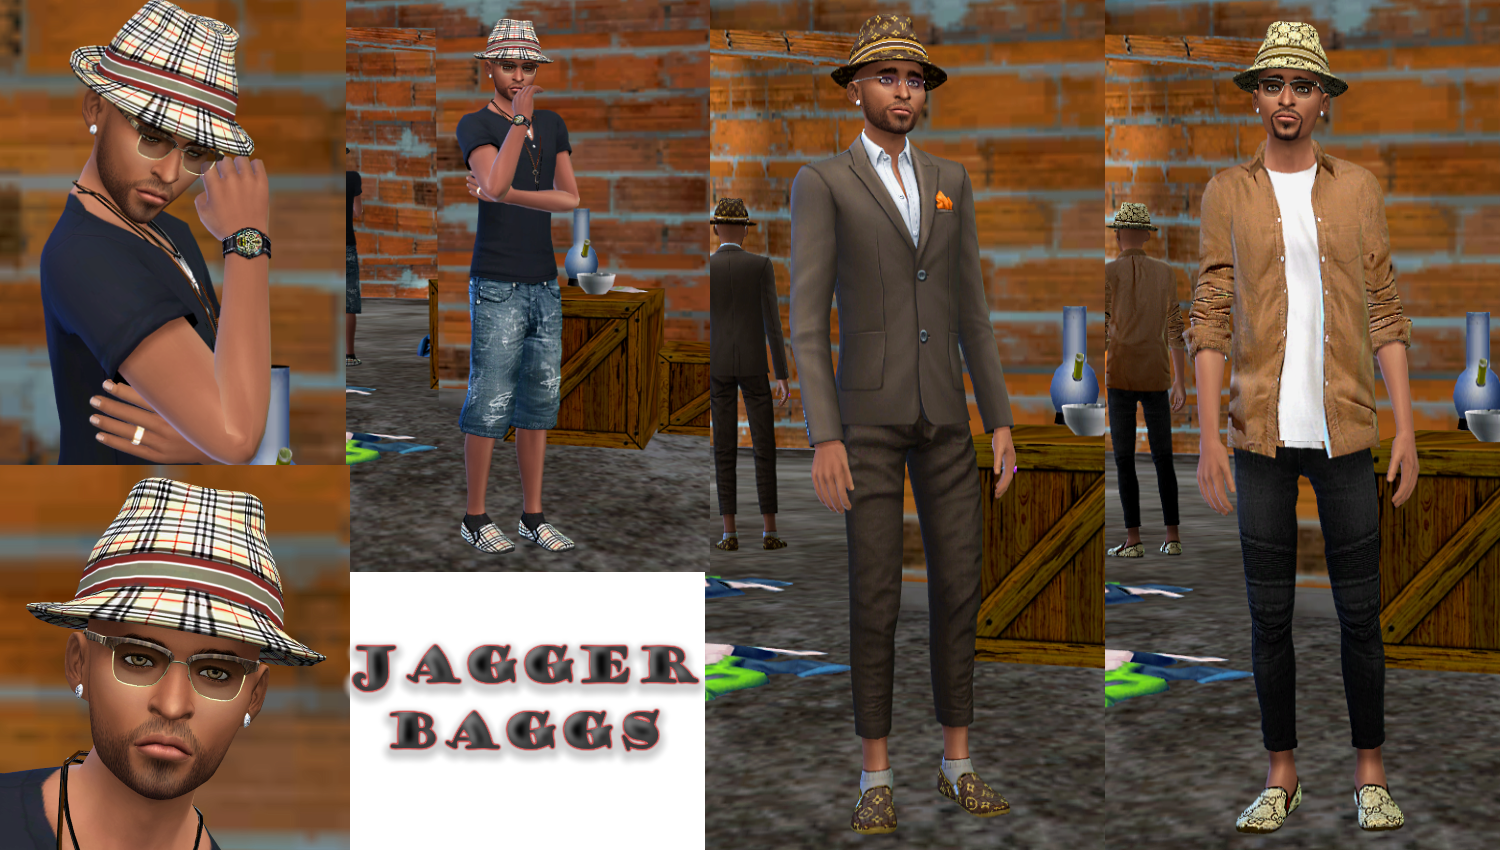 Jagger%20Baggs.png